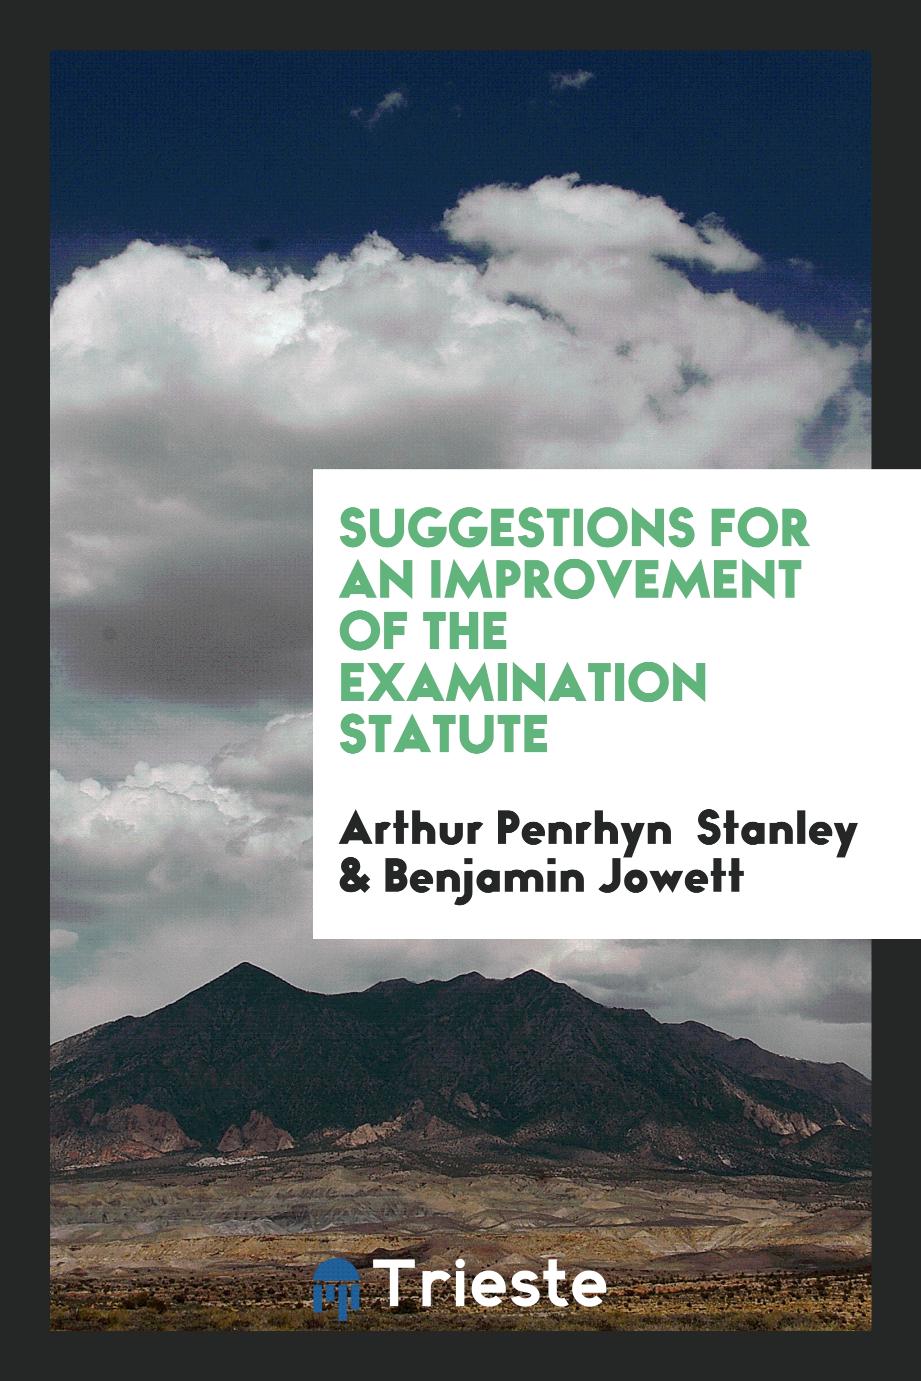 Suggestions for an improvement of the examination statute